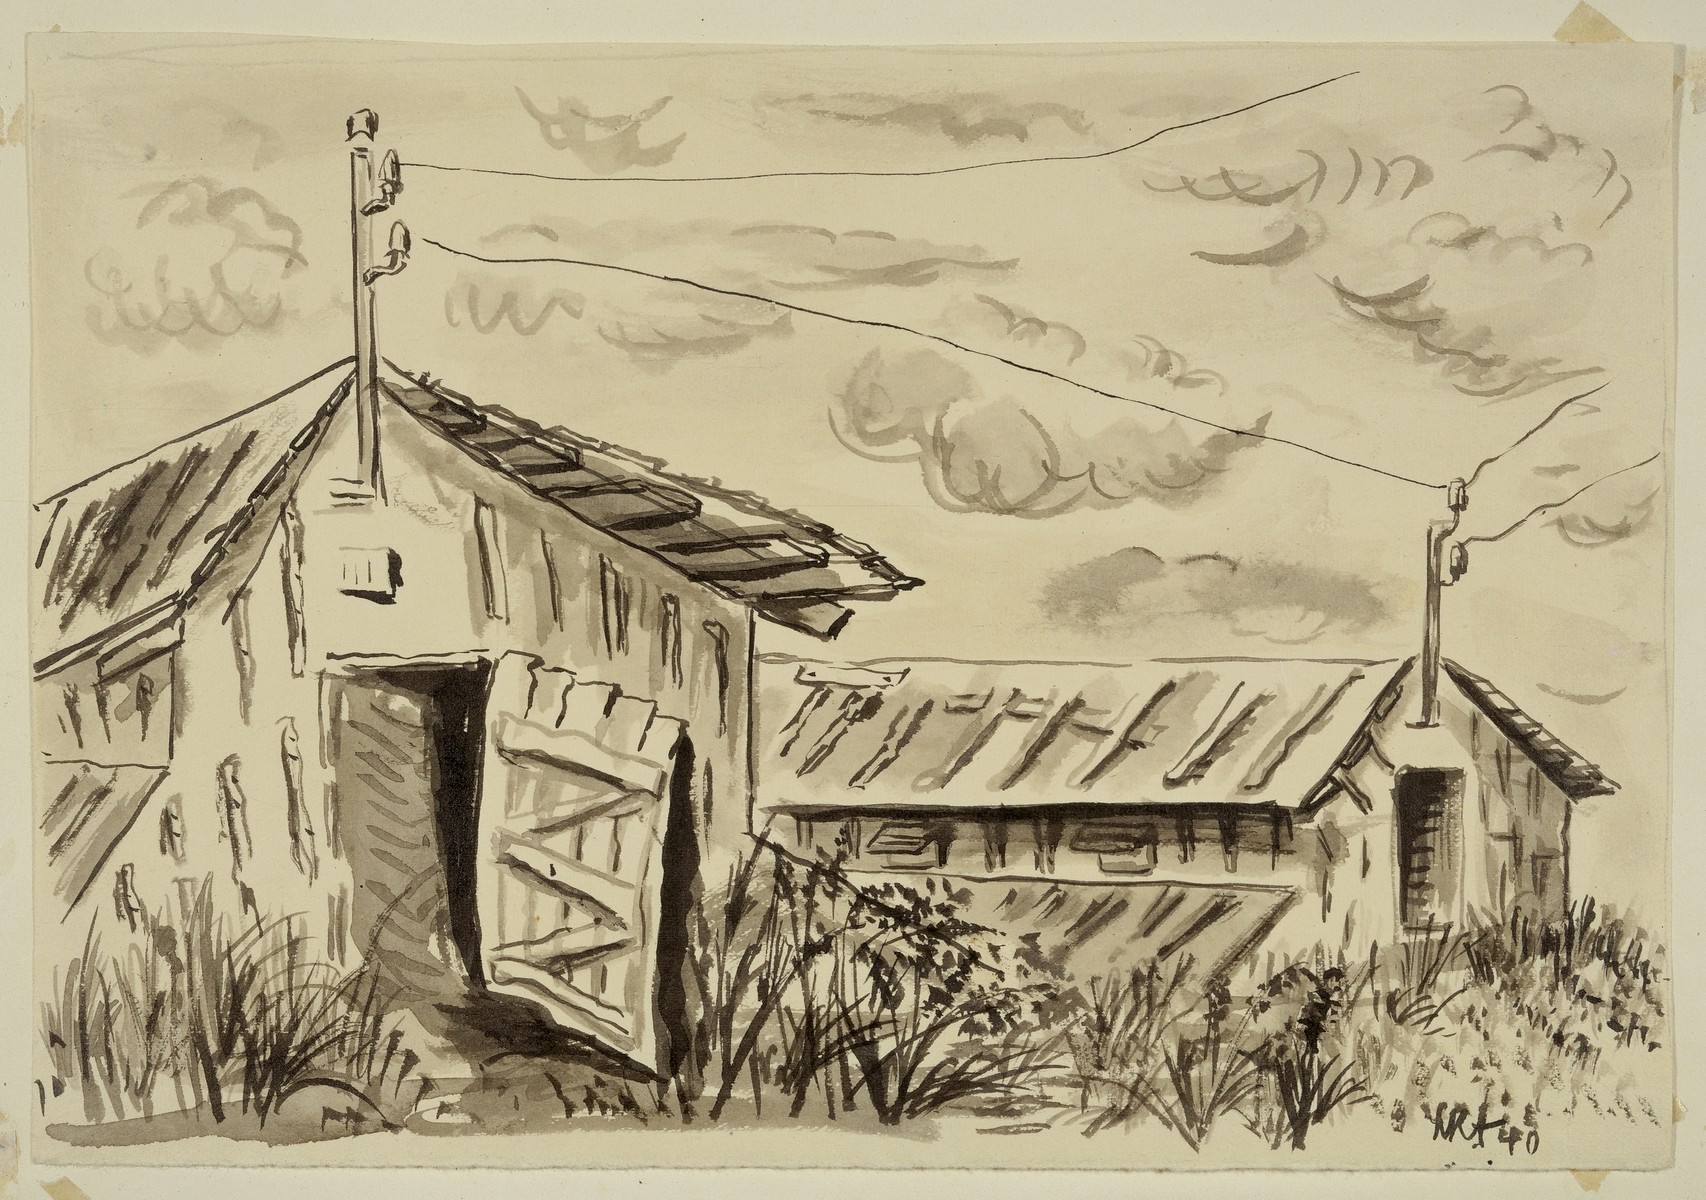 "Convalescent Barracks" by Lili Andrieux.  Sketch of wooden barracks with doors open, and electric utility pole with wires above doors.